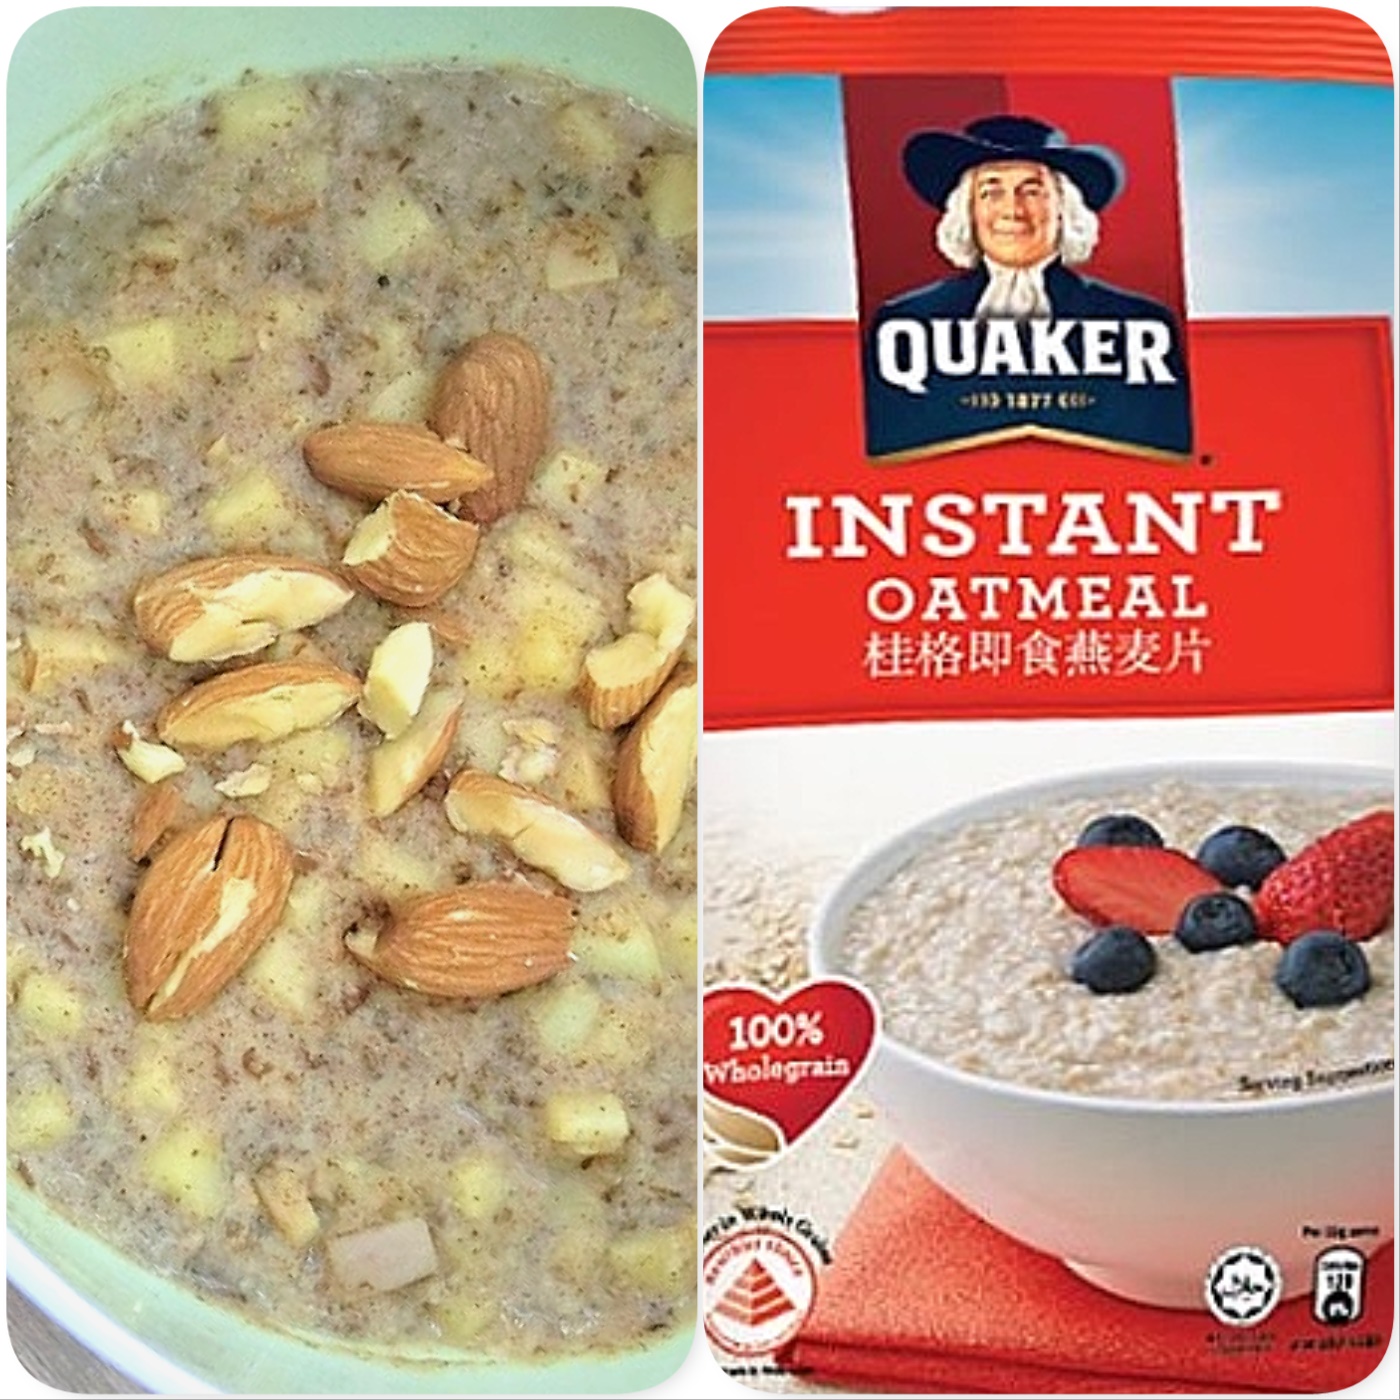 quaker oatmeal instructions microwave